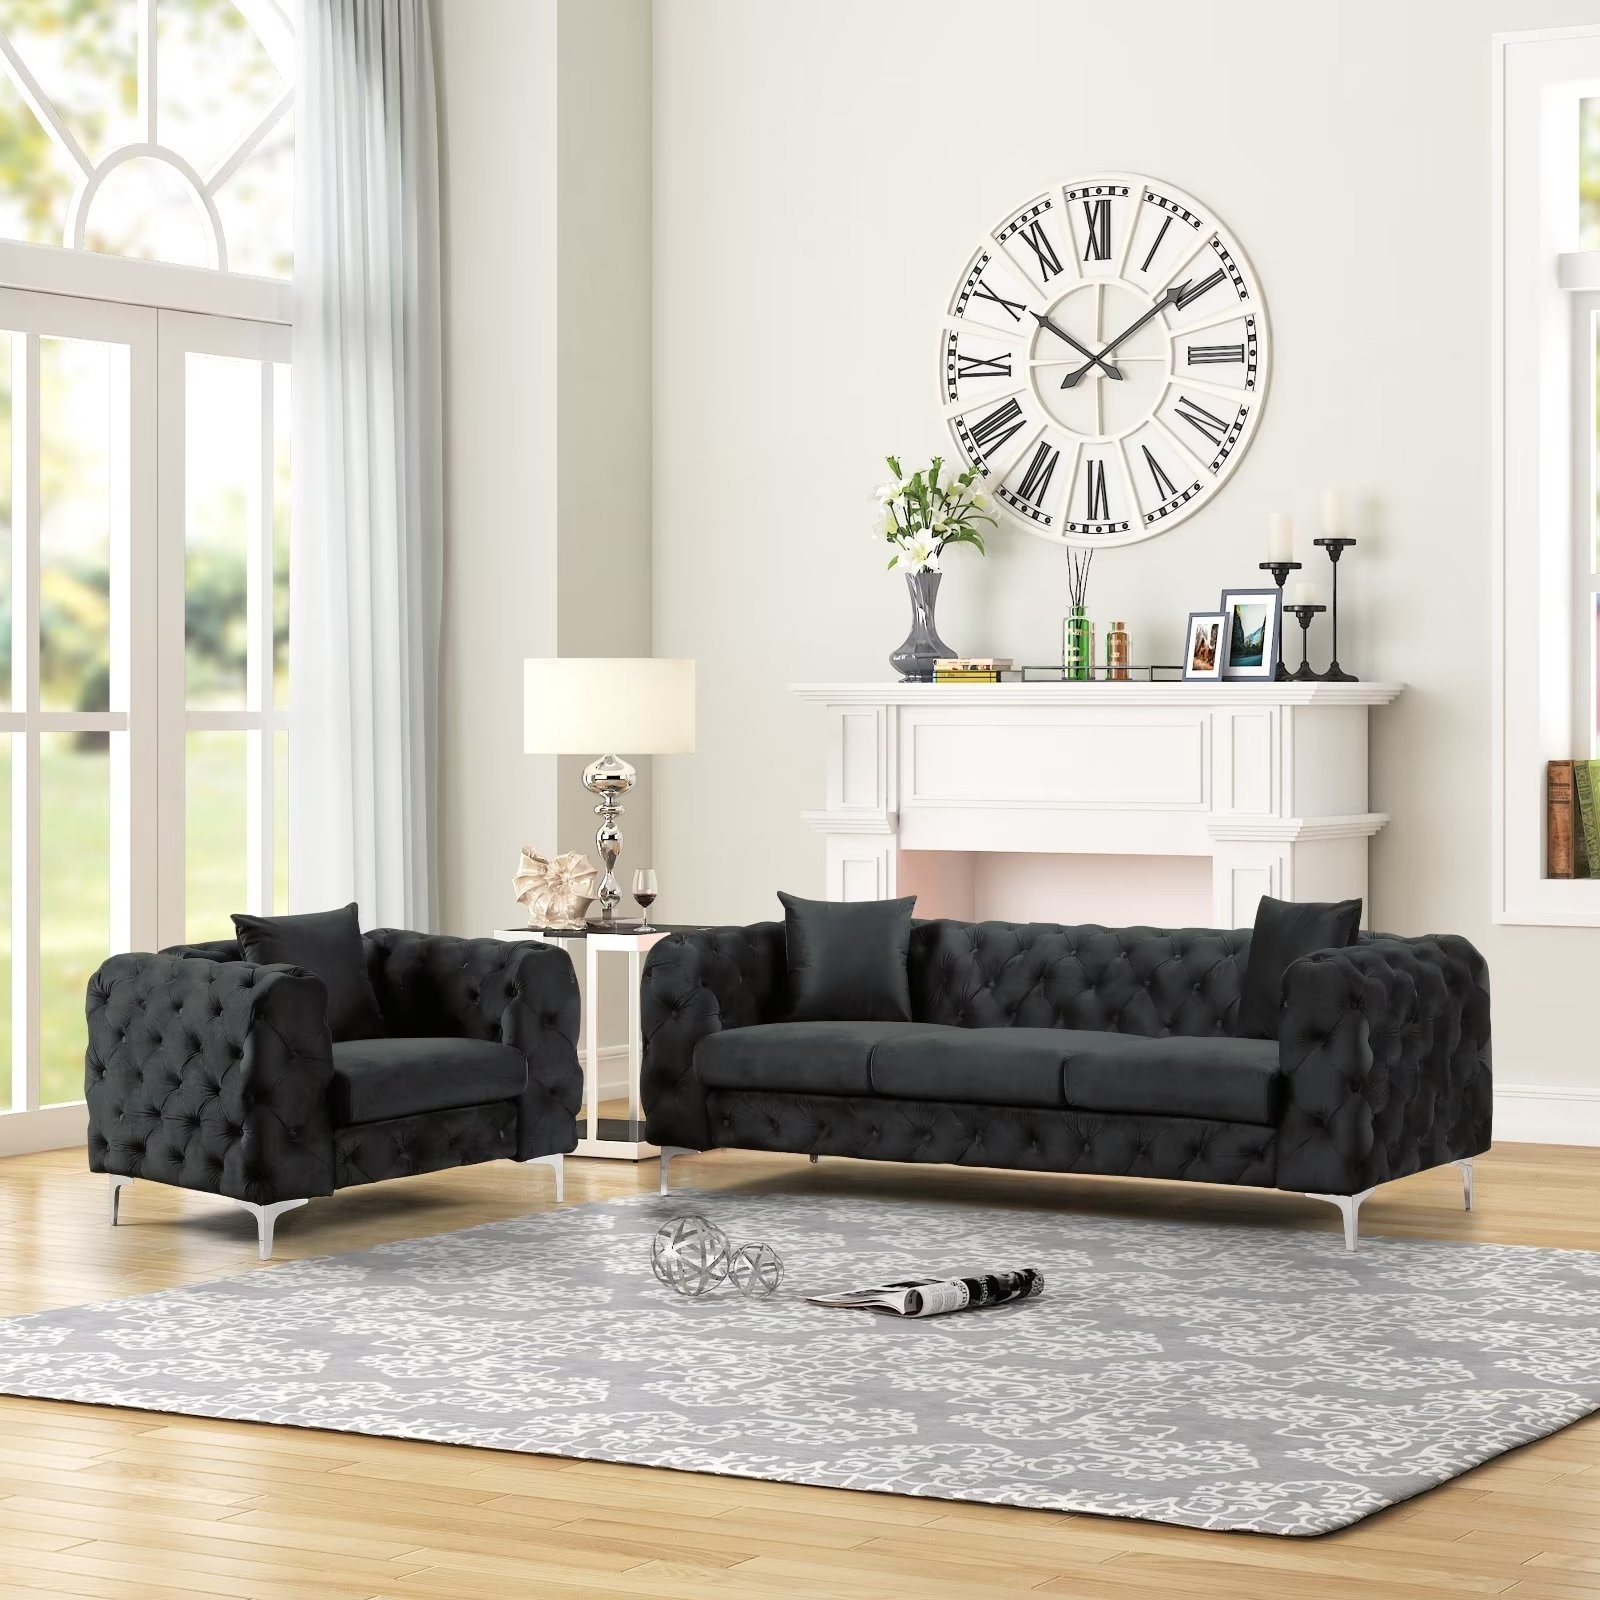 https://ak1.ostkcdn.com/images/products/is/images/direct/3ce17ee54d083ed283d077cdacb1ad97d23672ea/Morden-Fort-Modern-Contemporary-Chair-and-Sofa-Set-with-Deep-Button-Tufting-Dutch-Velvet%2C-Solid-Wood-Frame-and-Iron-Legs.jpg